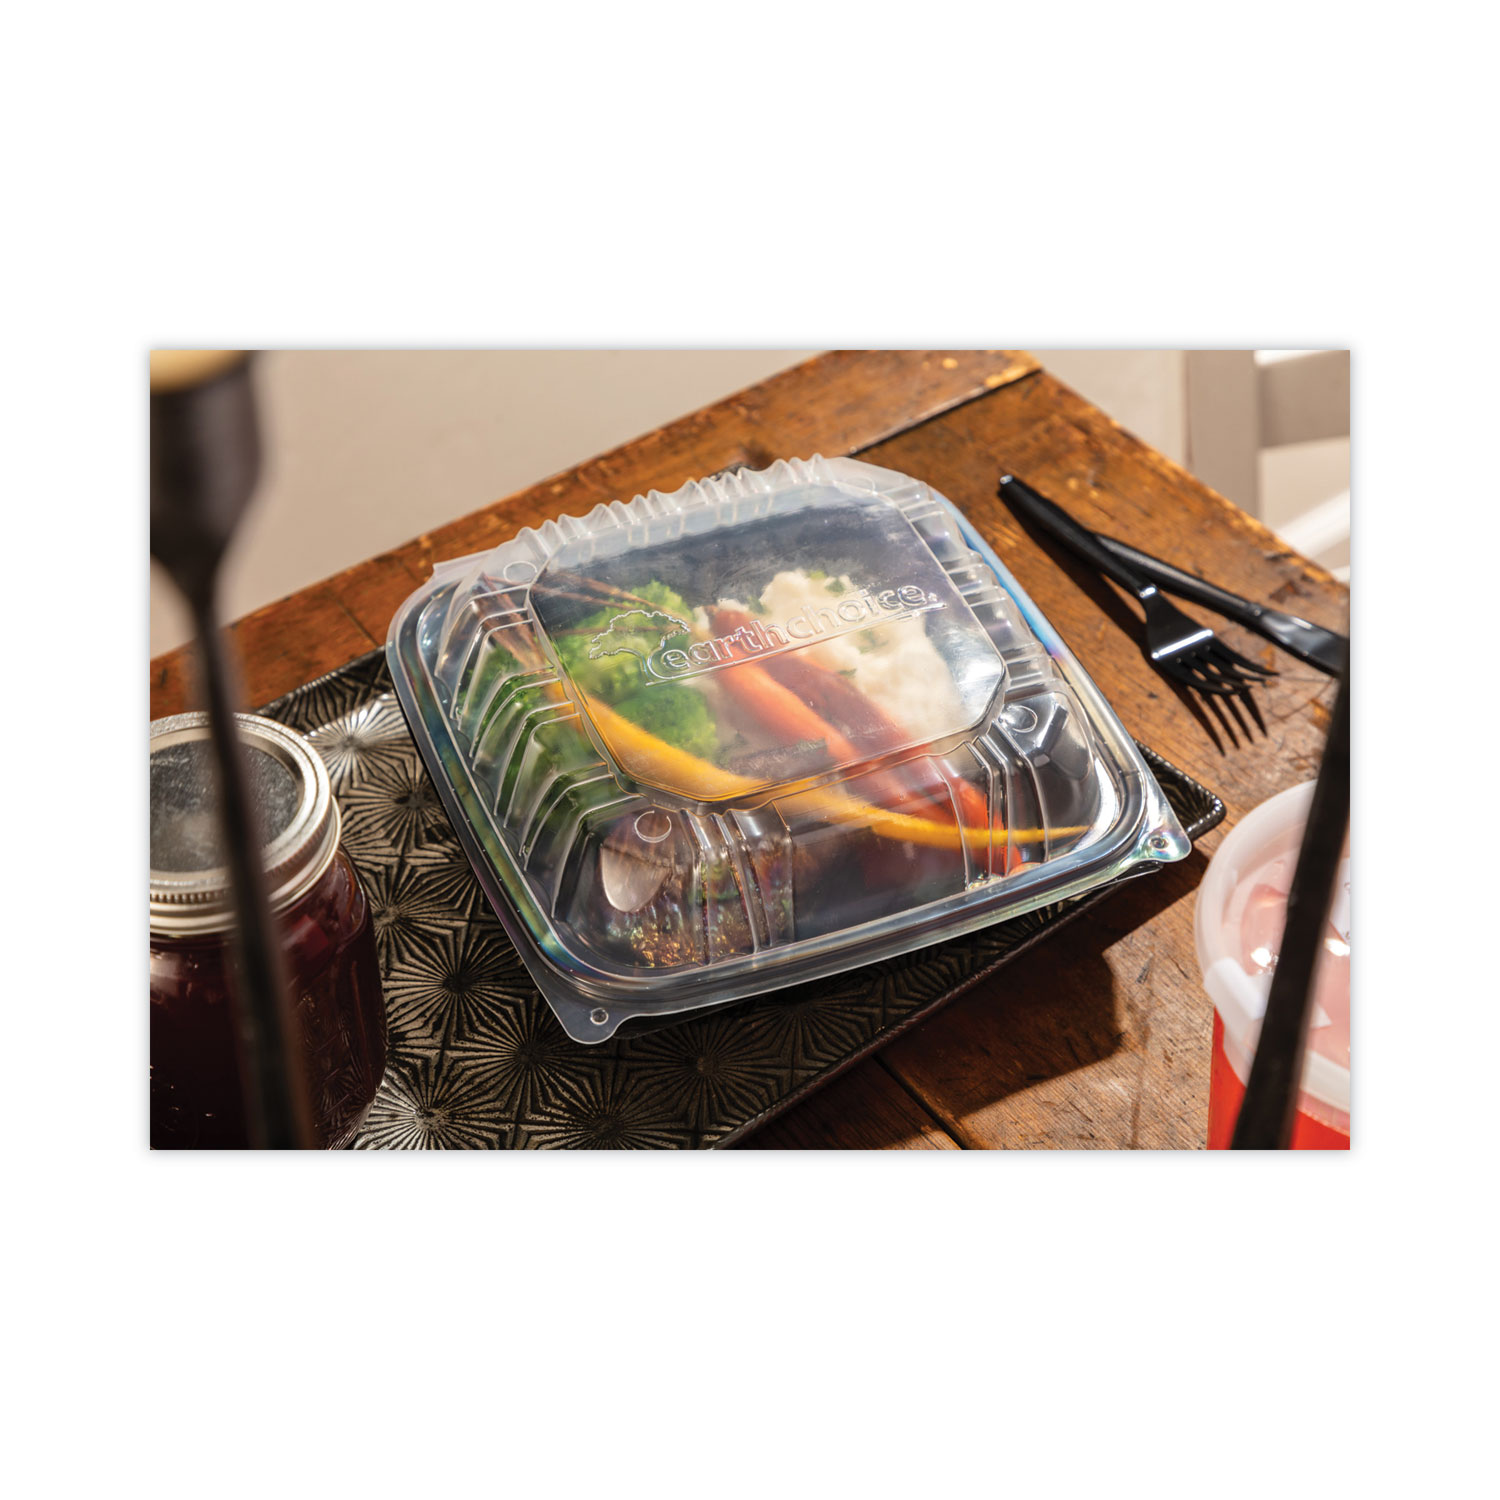 EarthChoice Vented Dual Color Microwavable Hinged Lid Container, 3-Compartment, 21 oz, 8.5 x 8.5 x 3, Black-clear, 150-carton